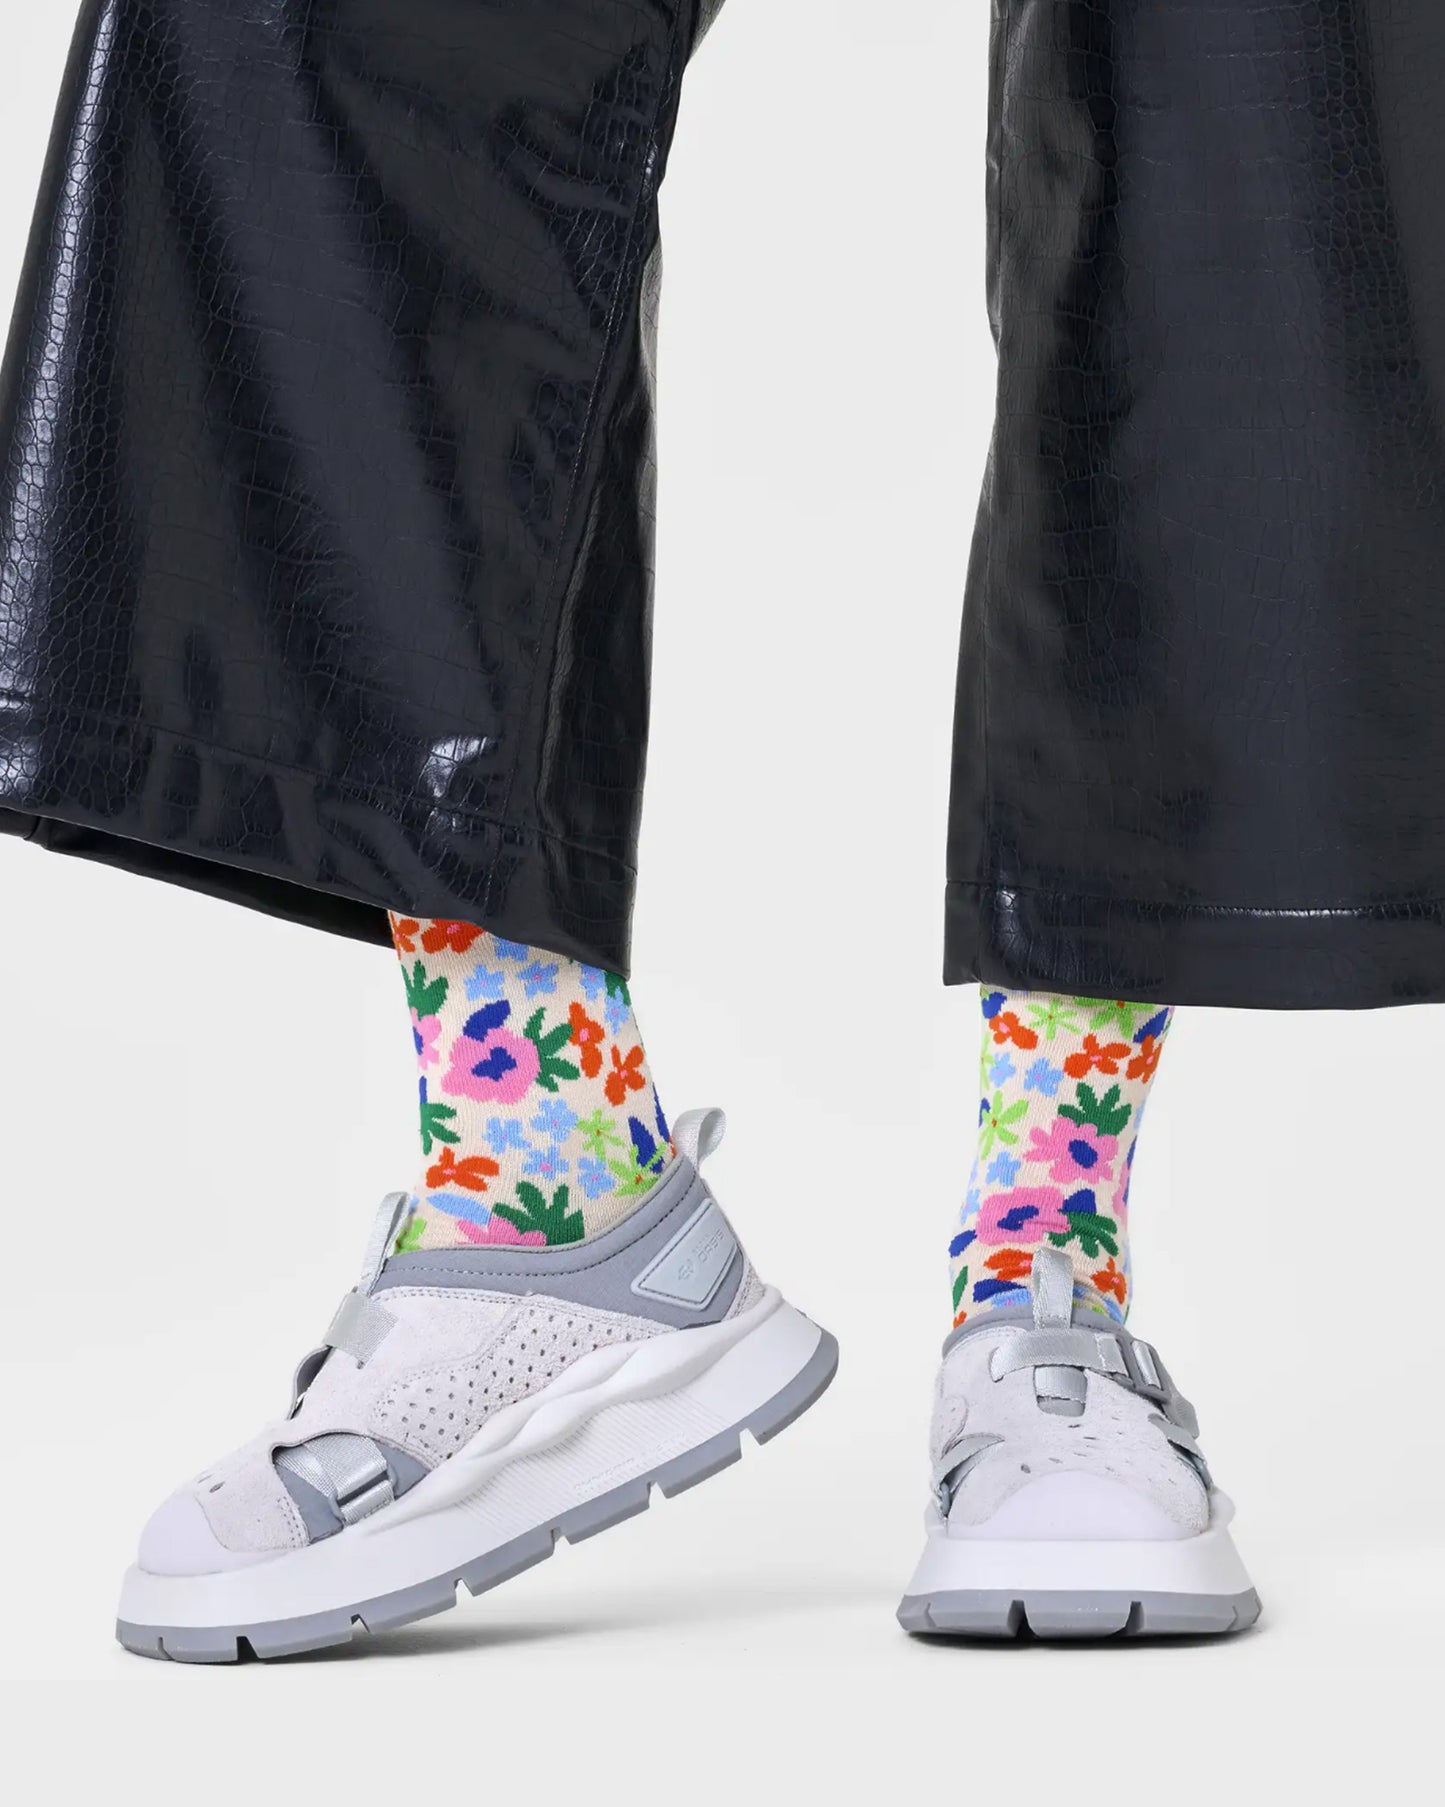 Happy Socks P000835 Flower Sock - Cream cotton crew length ankle socks with bright multicoloured flower pattern. Worn with dark navy faux crocodile skin pants and white and grey chunky trainers.